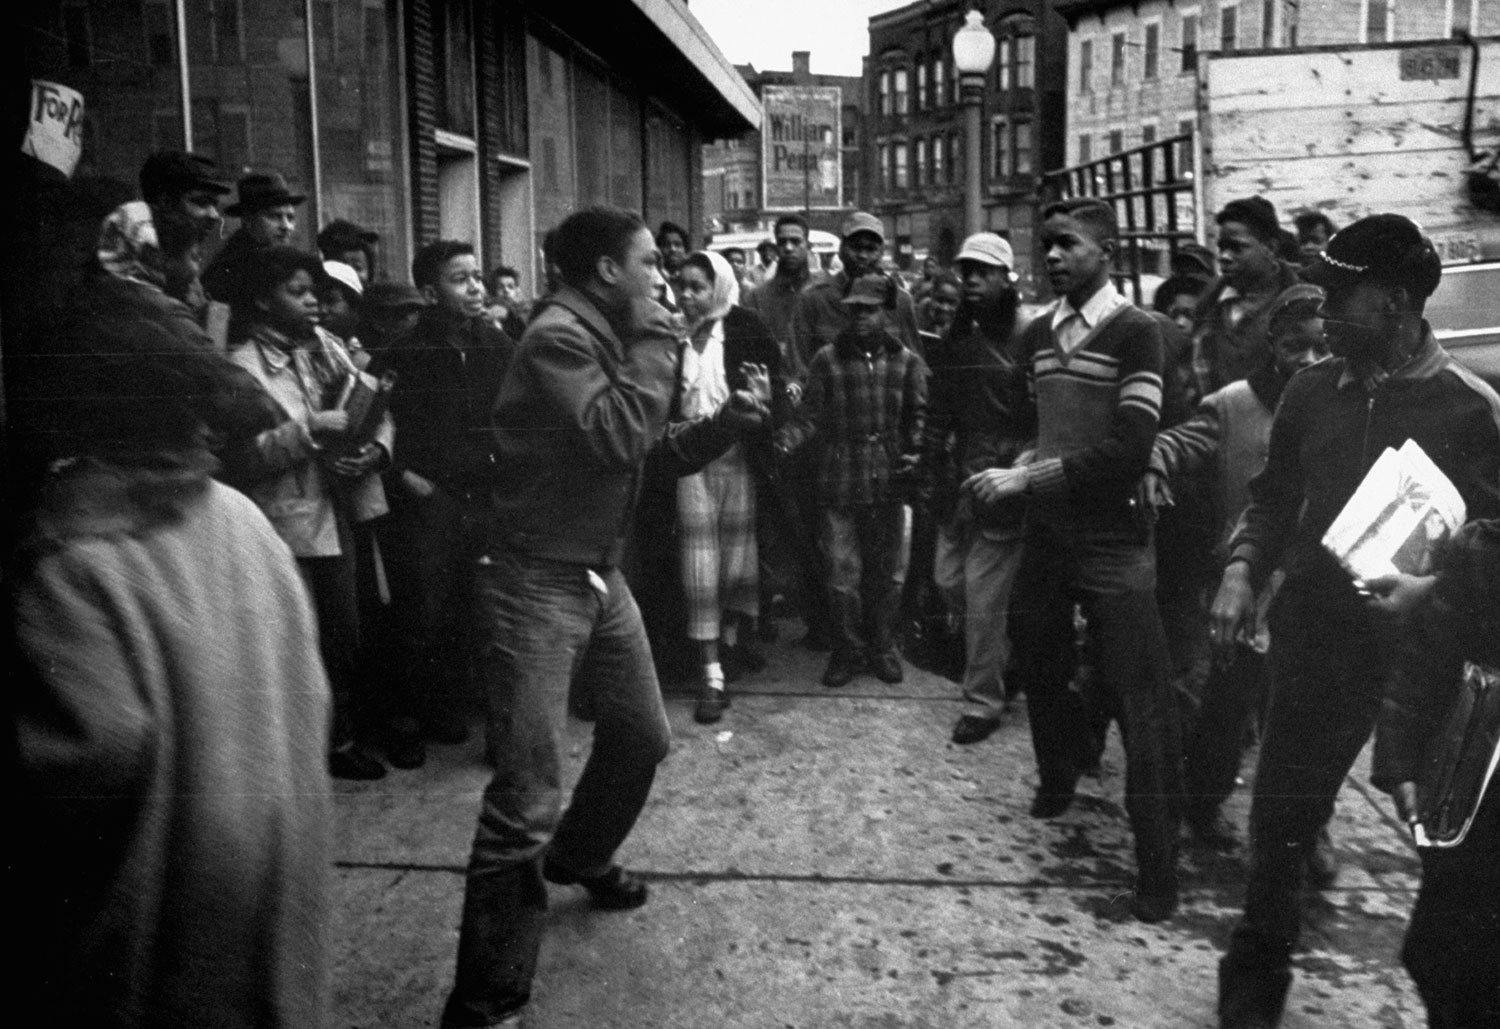 Teenagers fighting in the streets, Chicago, 1954.